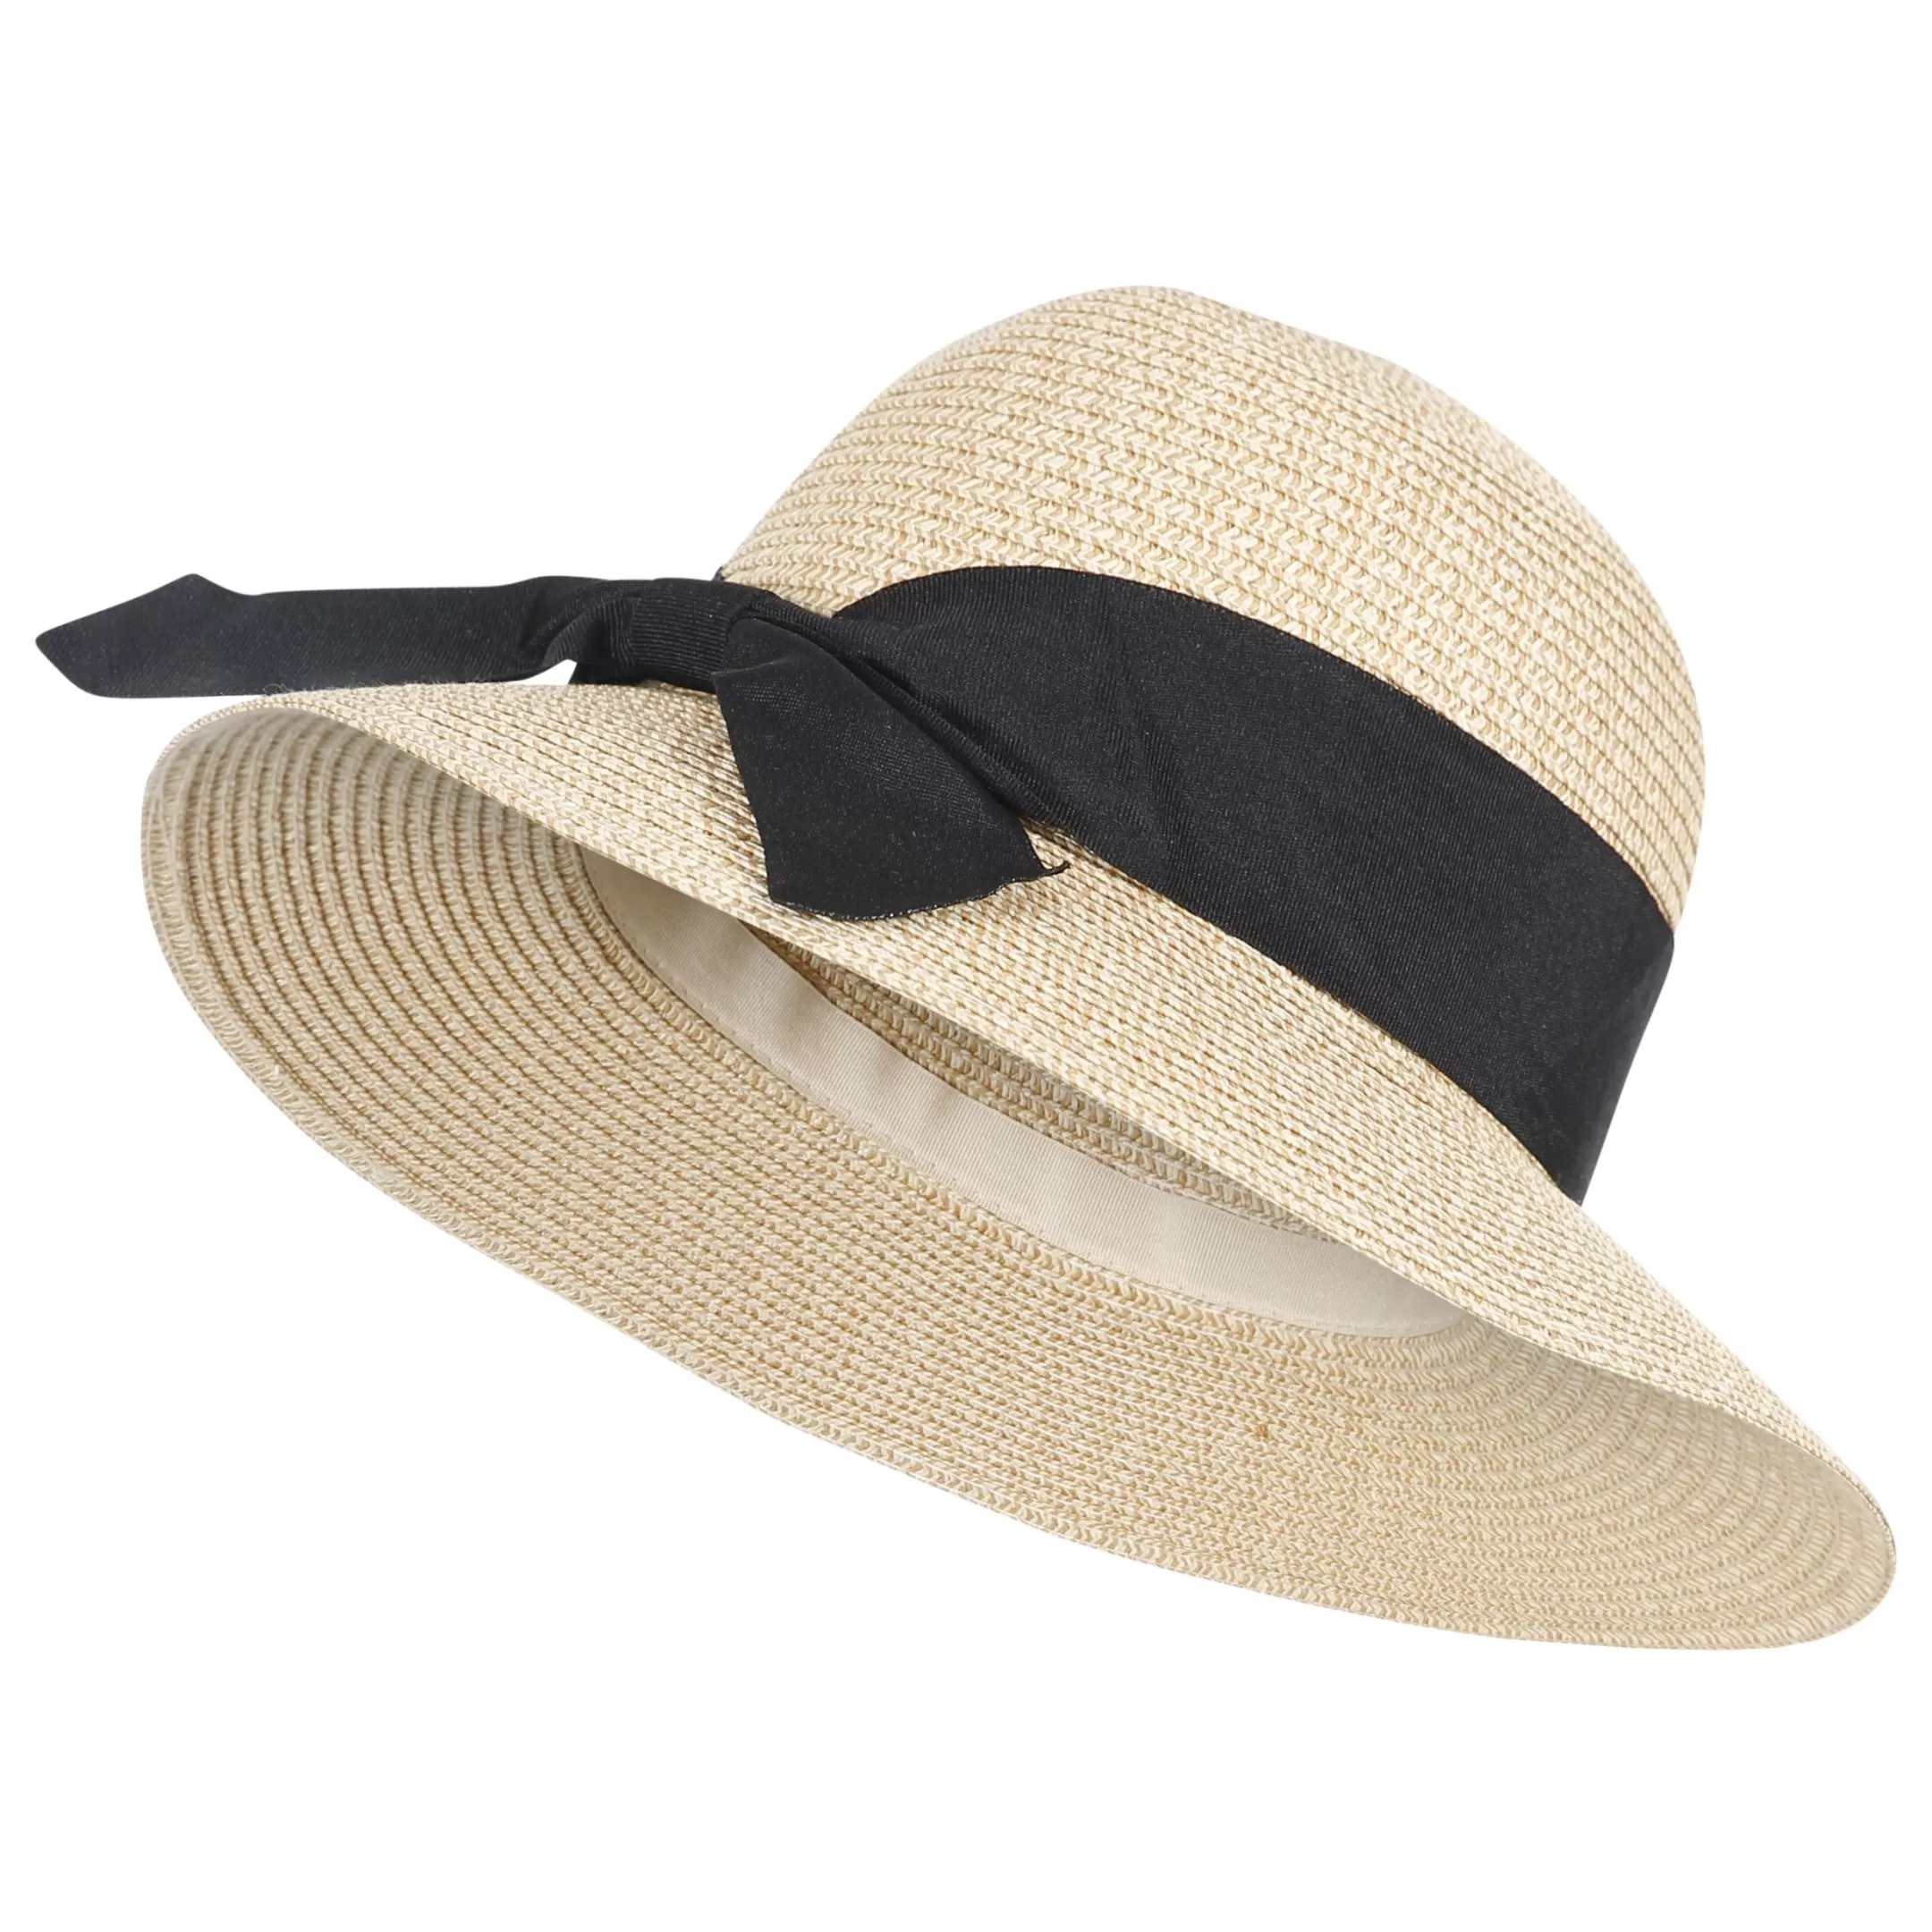 Womens Straw Hat Brimming | Trespass Outlet